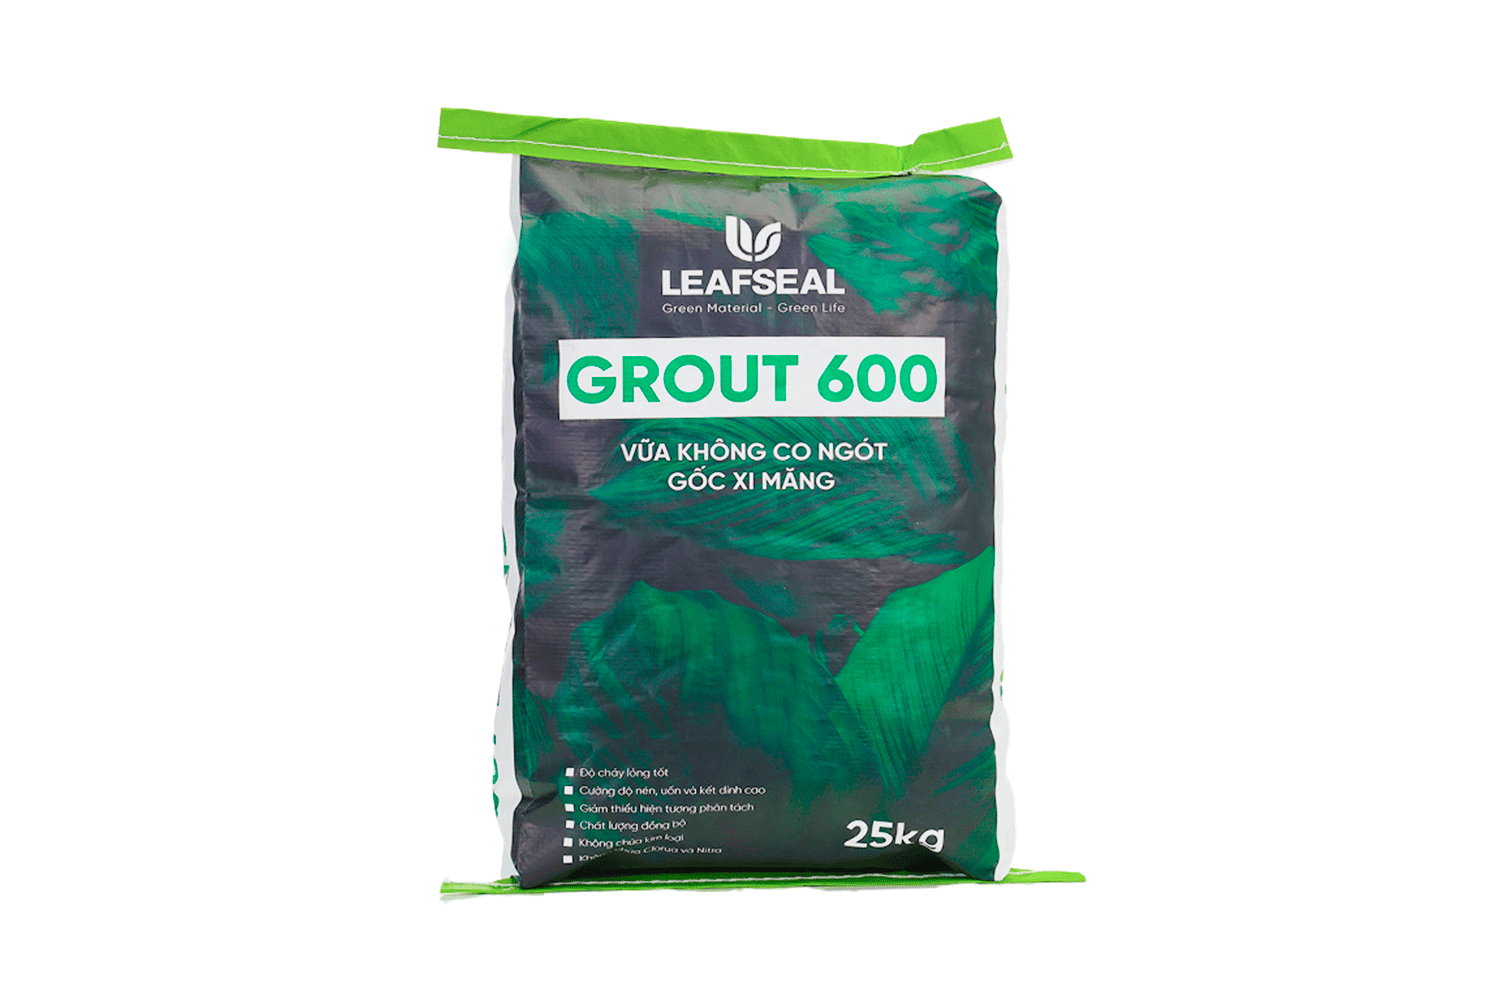 LeafSeal Grout 600